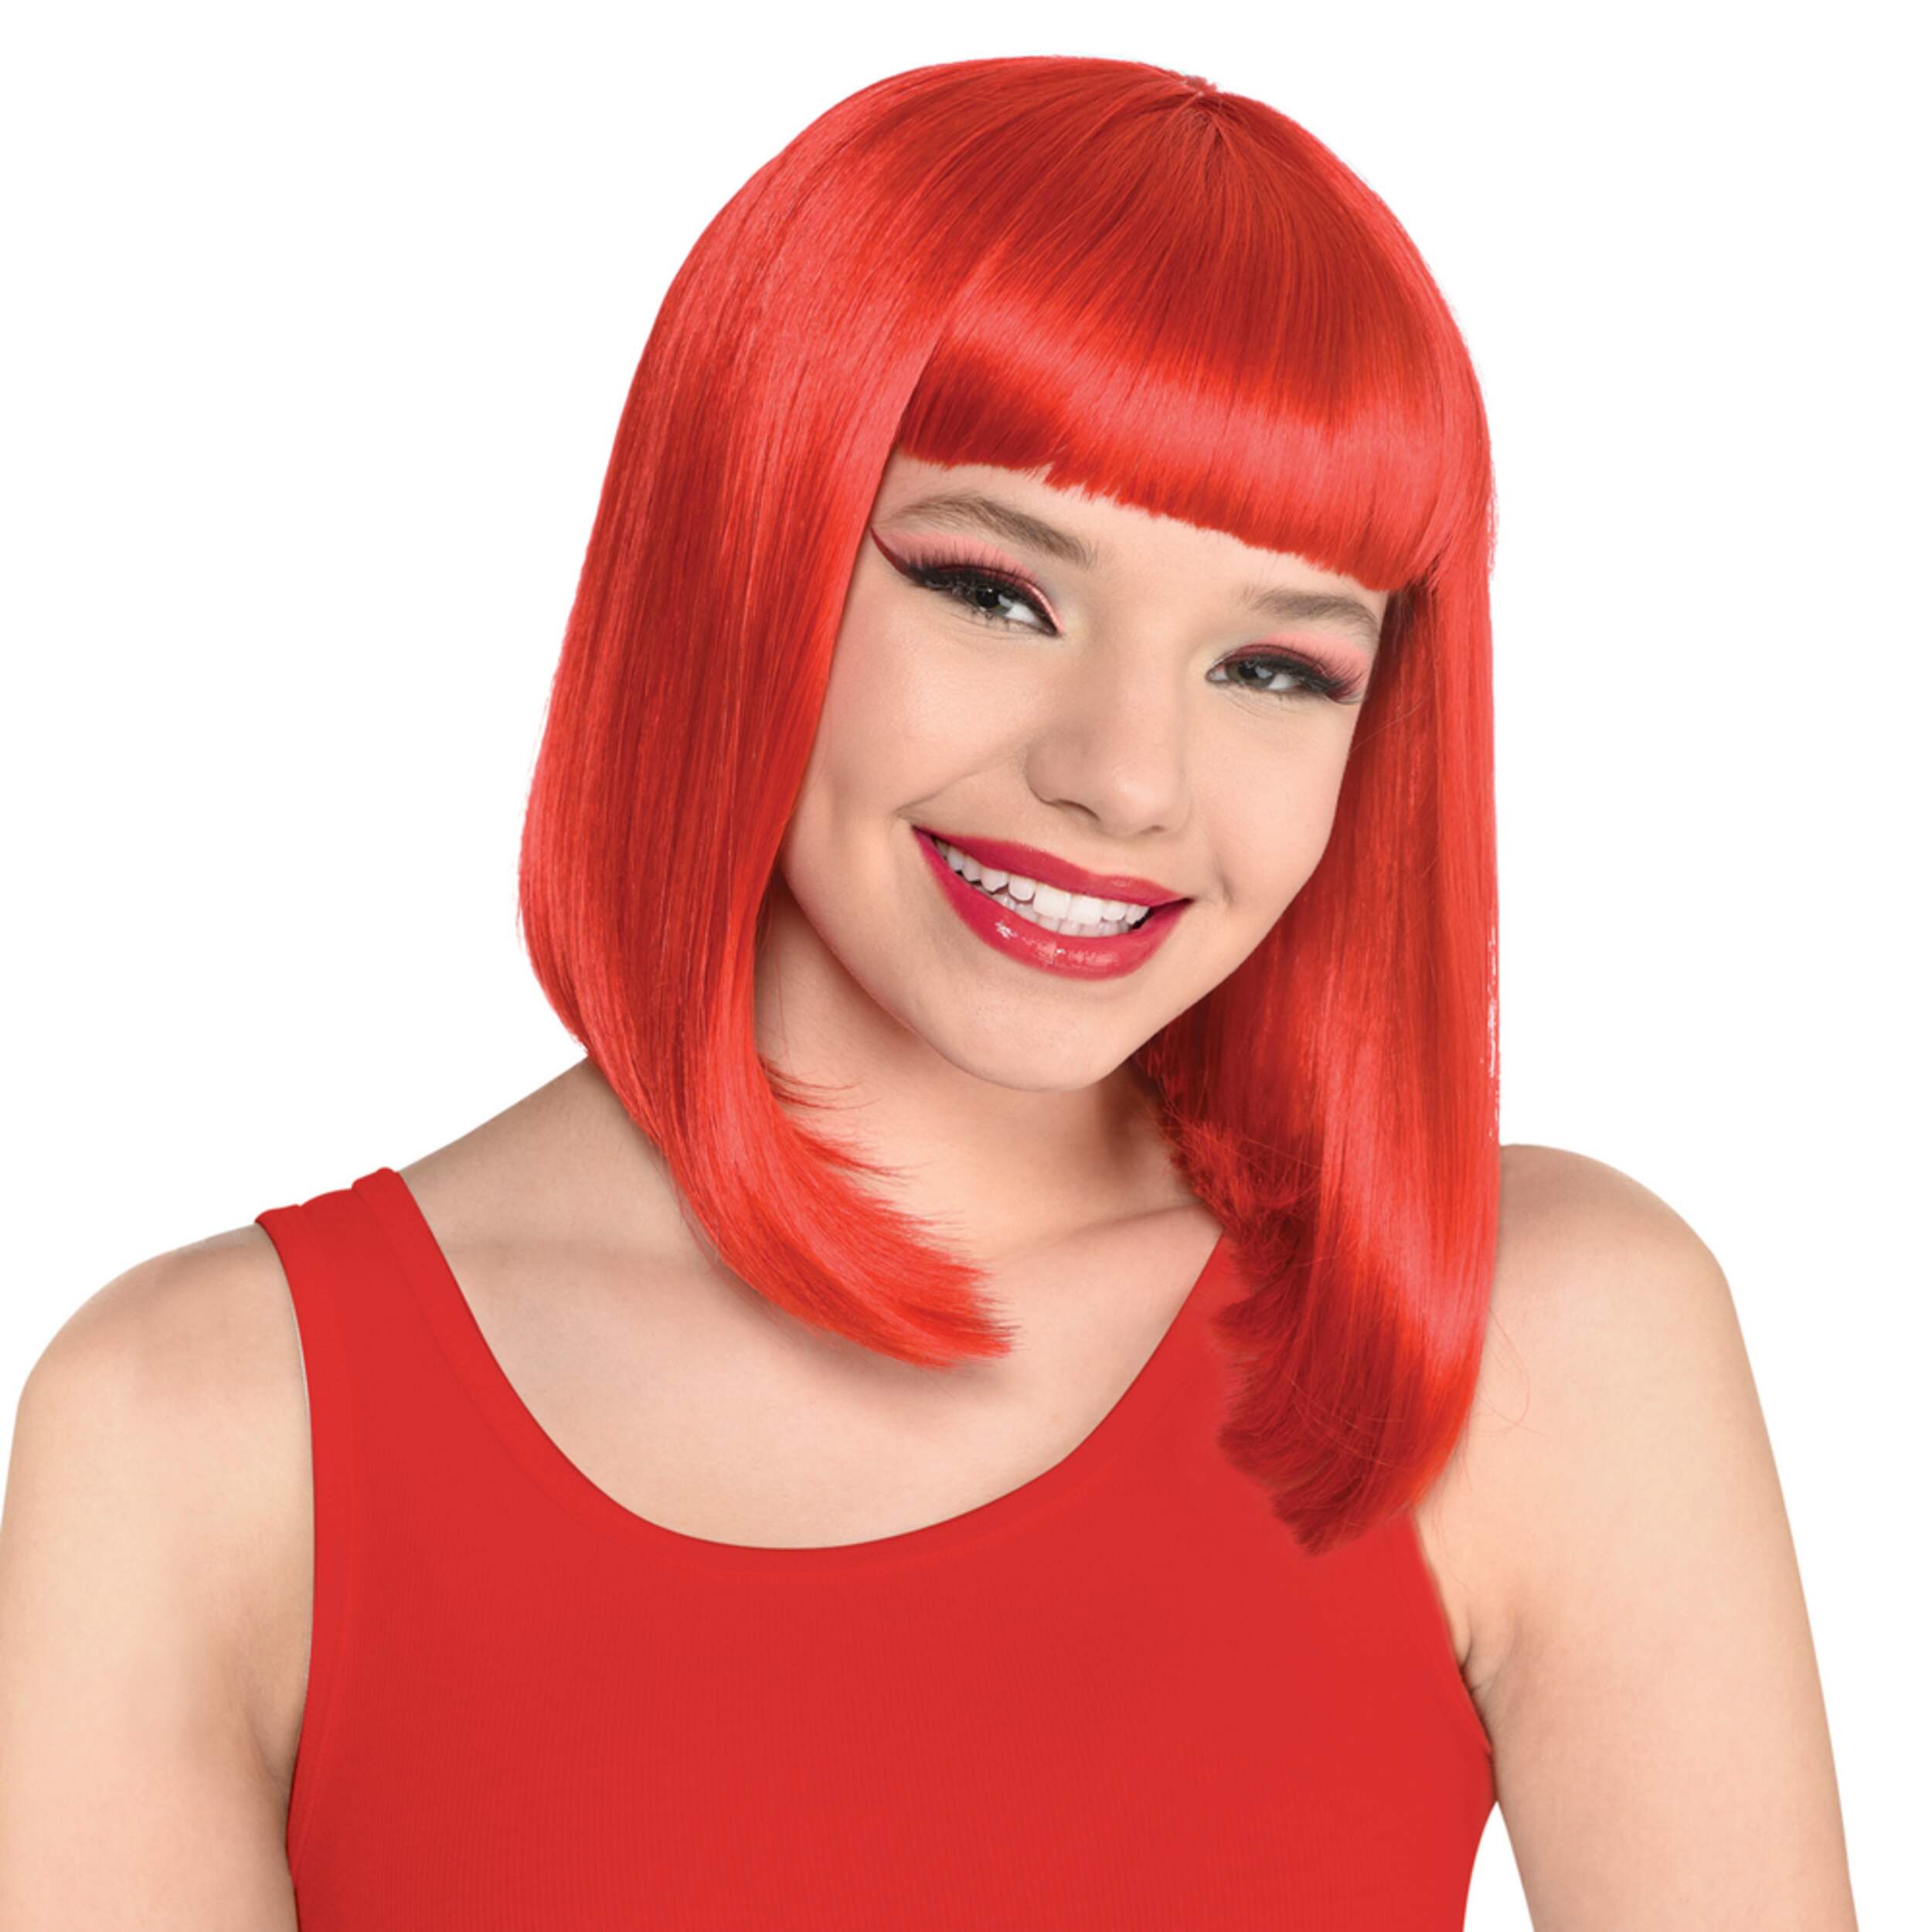 Bob Straight Hair Wig Red One Size Wearable Costume Accessory For Halloween Party City